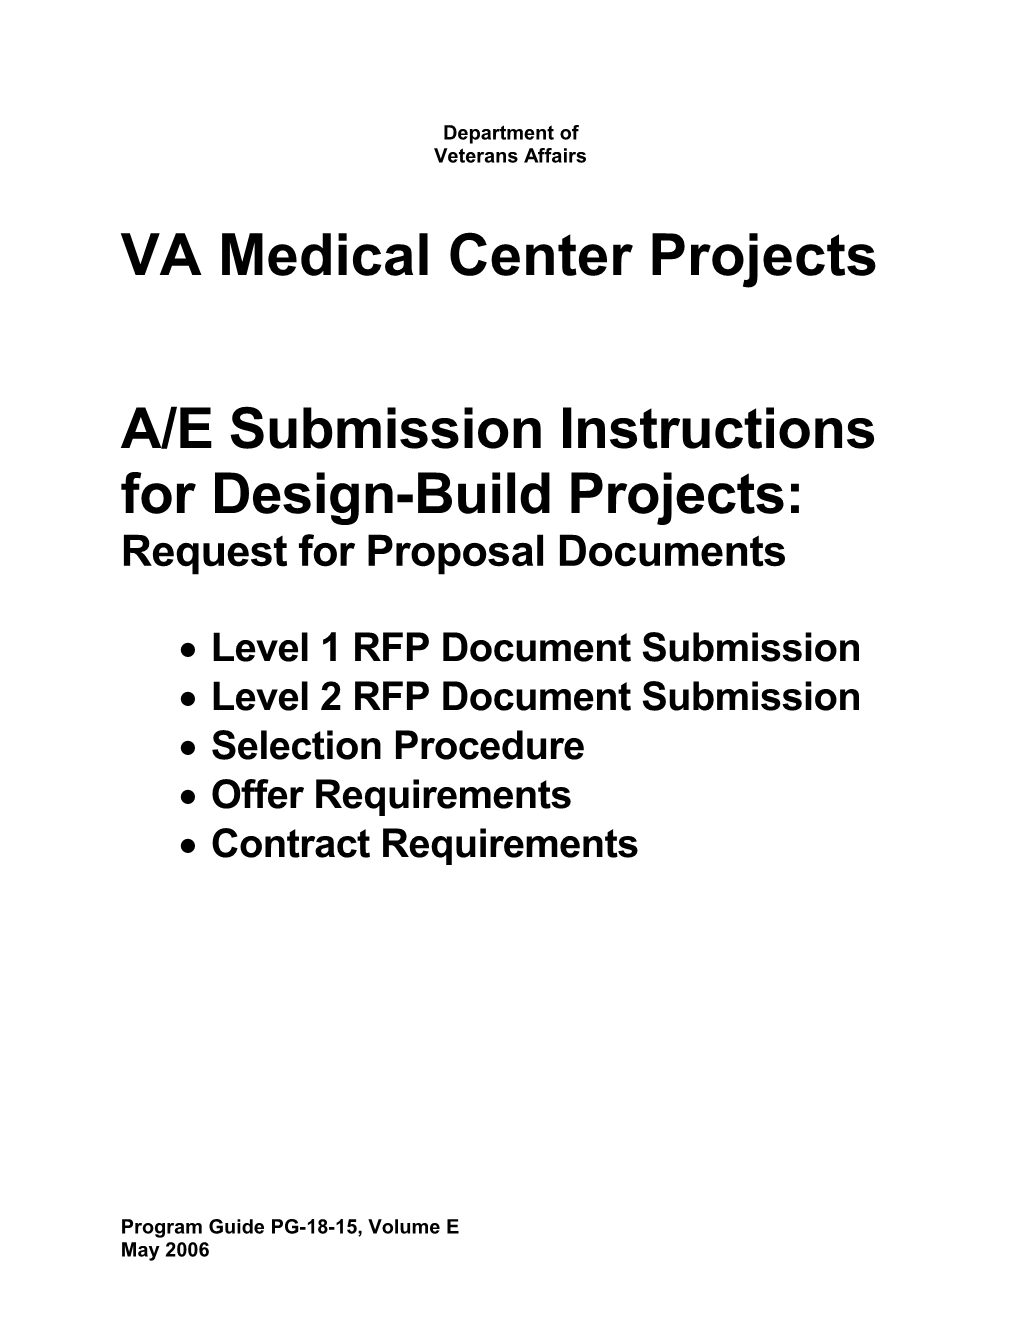 A/E Submission Instructions - RFP Design Build Projects